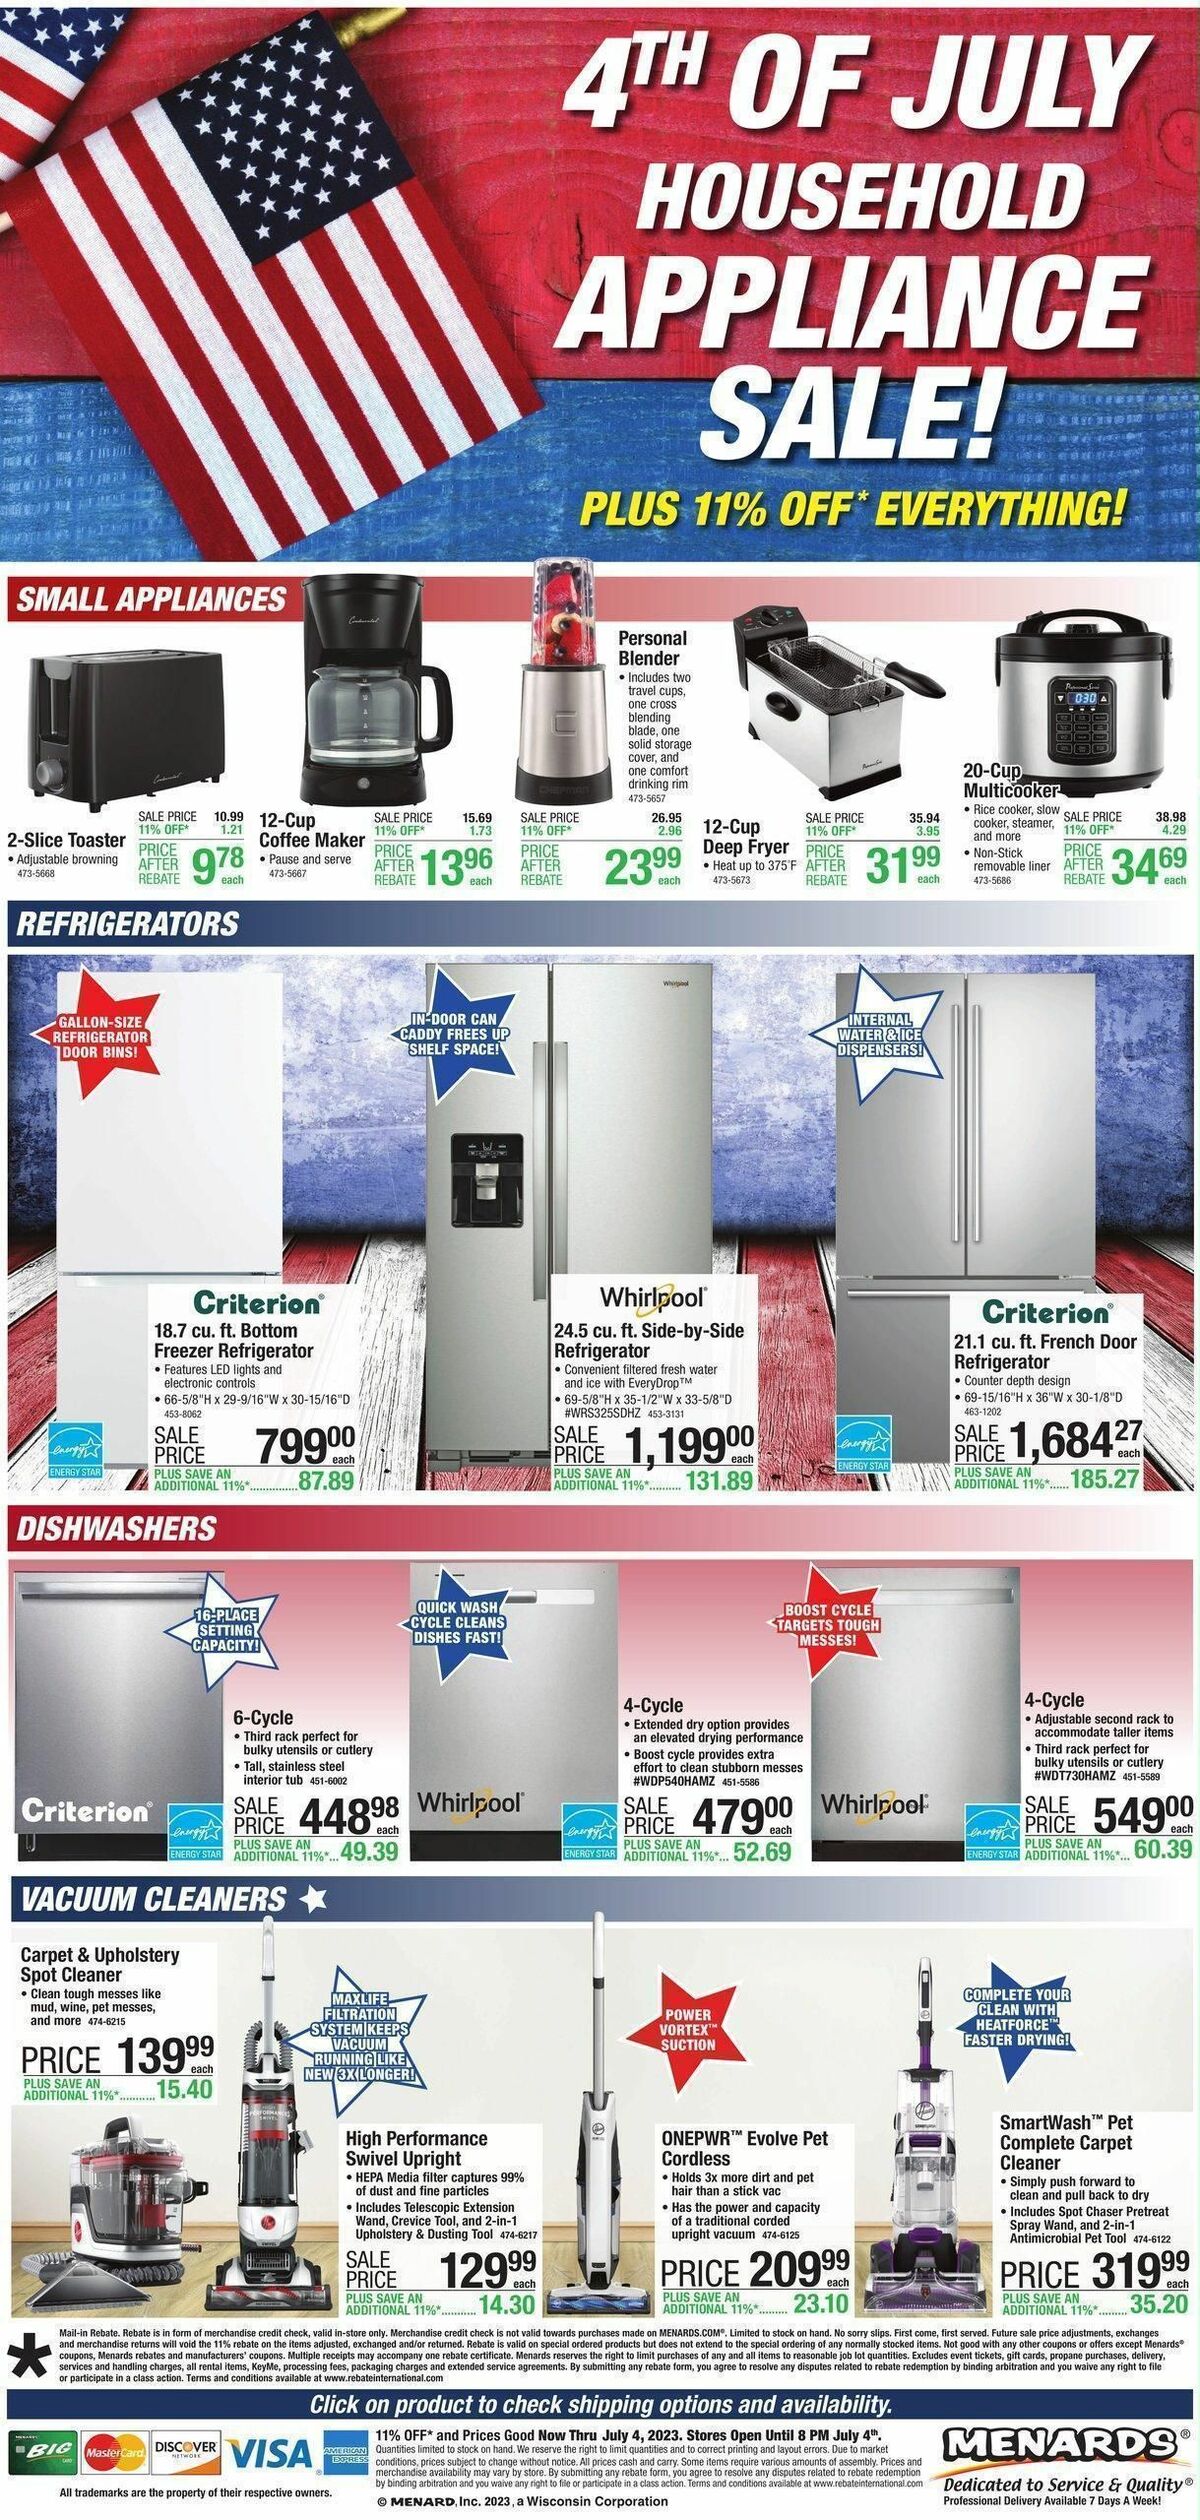 Menards Appliance July 4th Event Weekly Ads & Special Buys from June 22